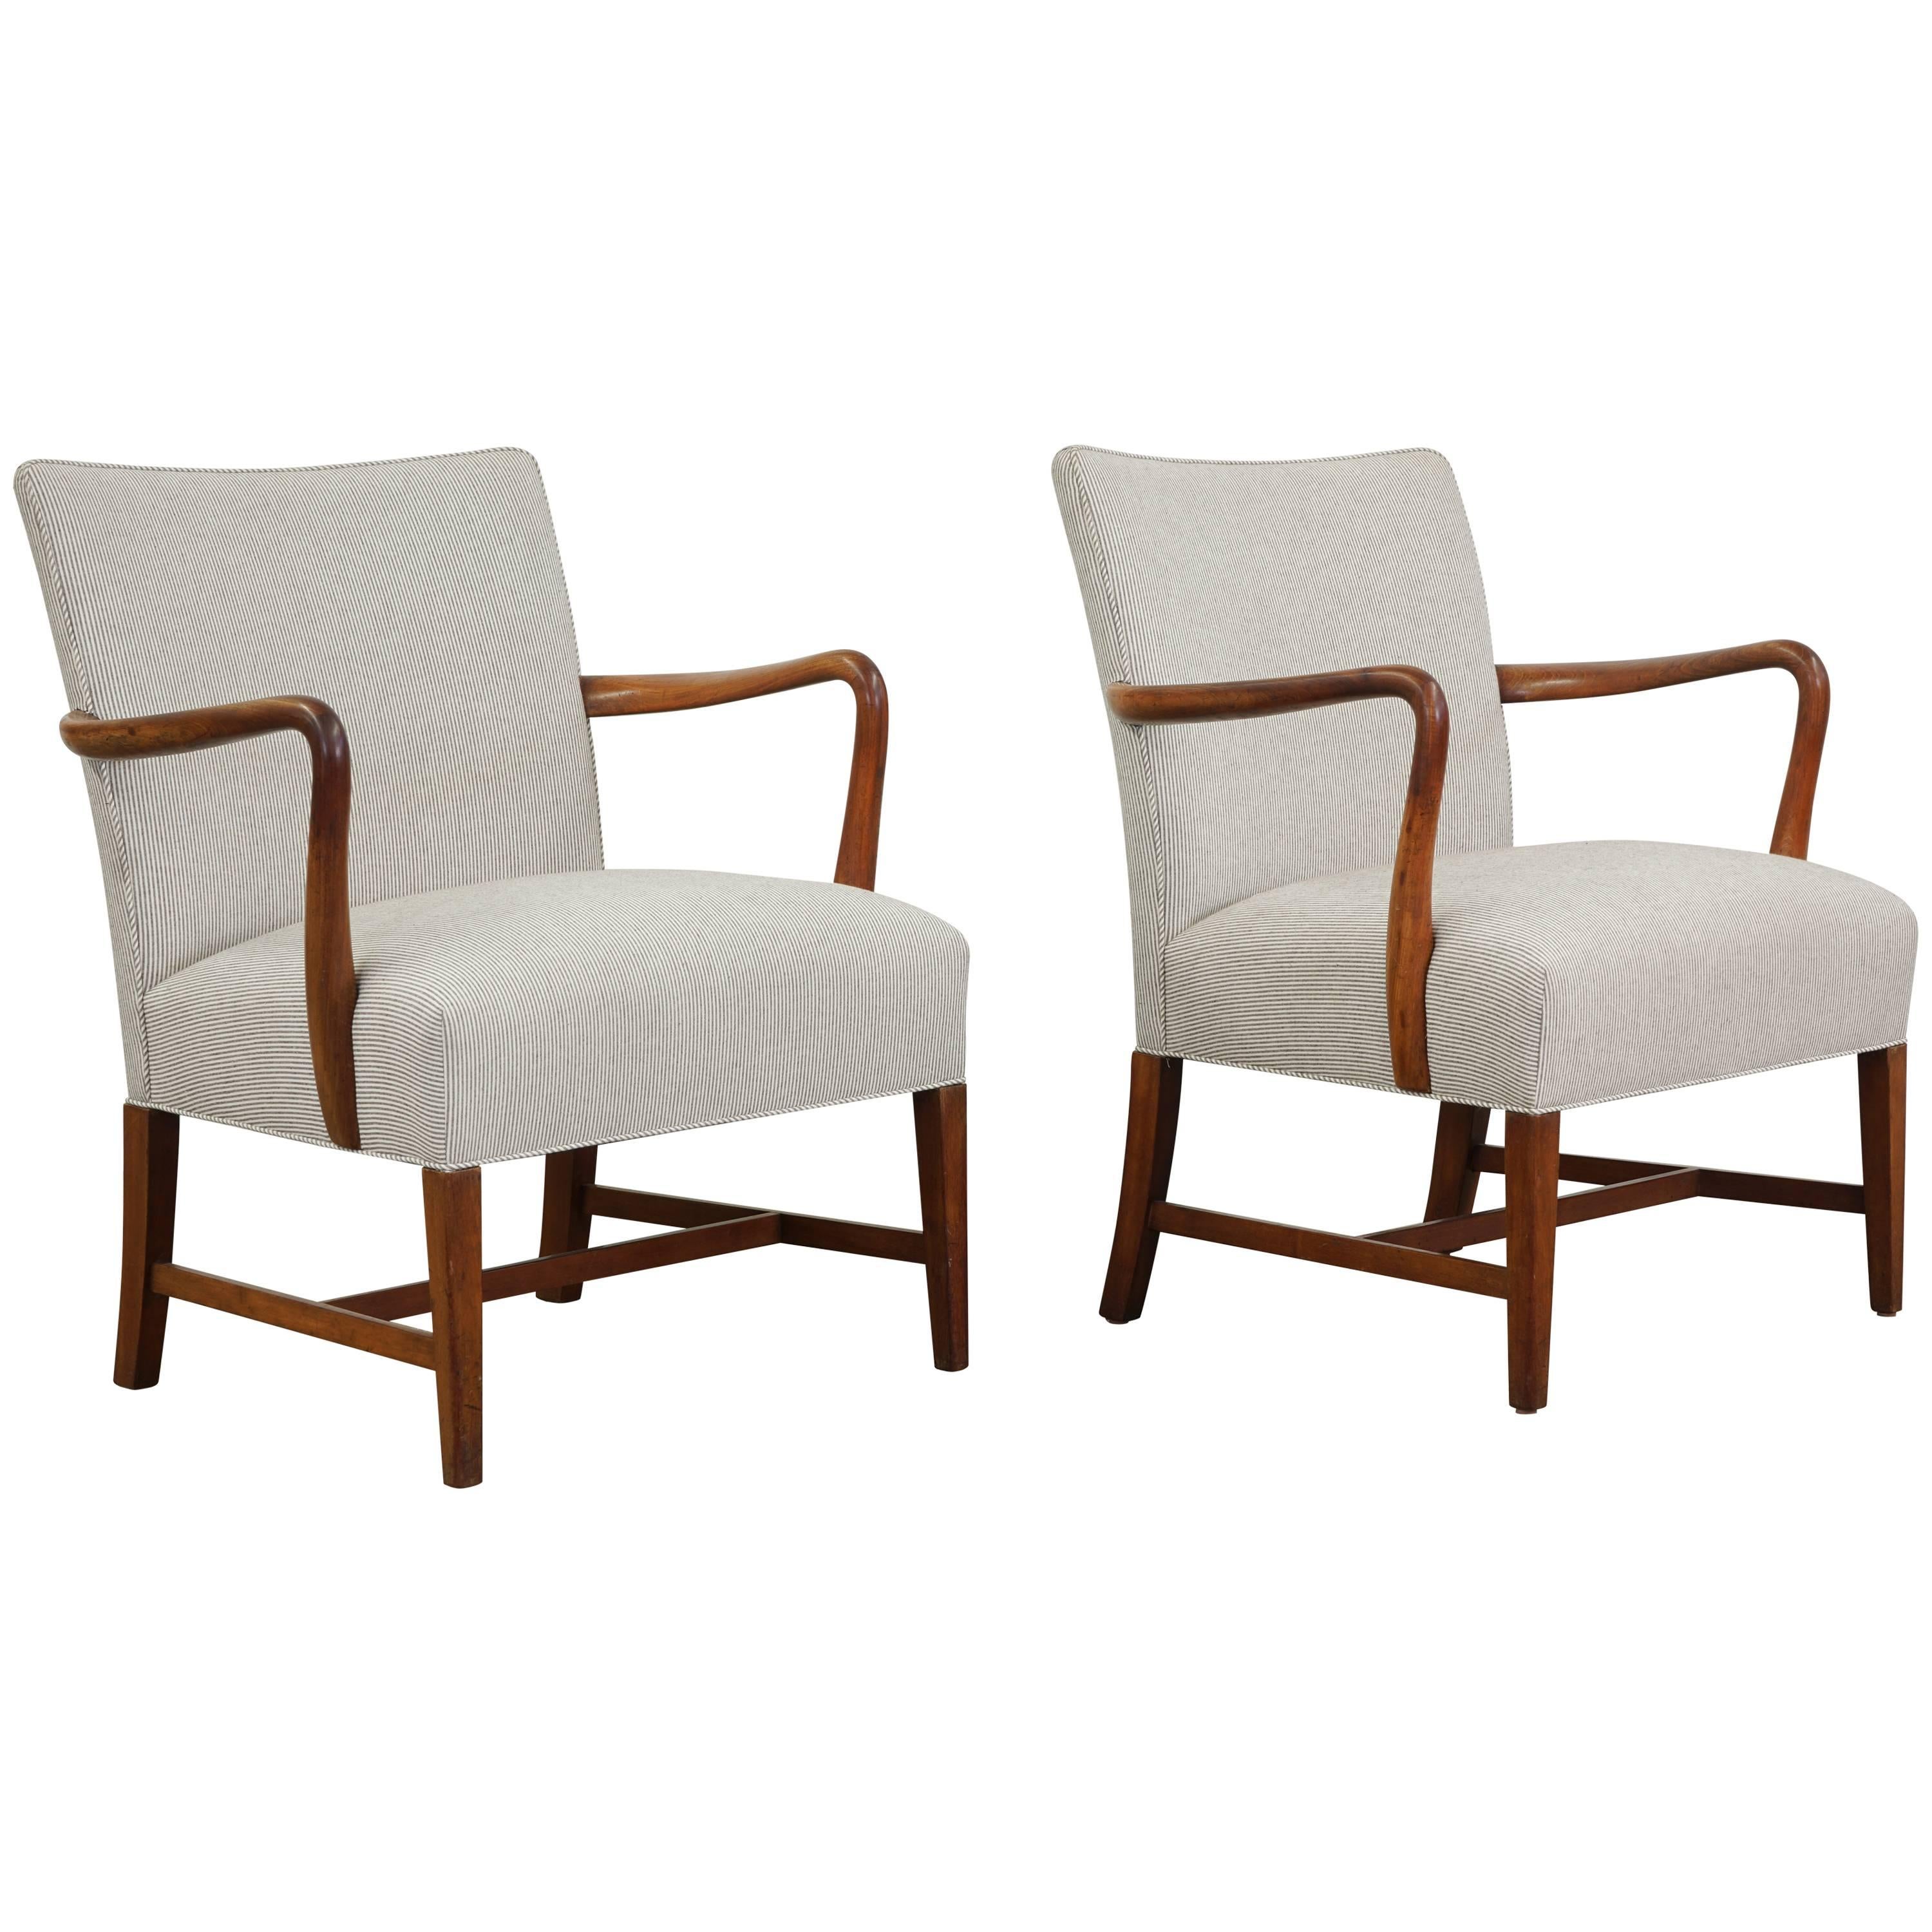 Pair of 1950s Danish Armchairs in the Manner of Jakob Kjaer